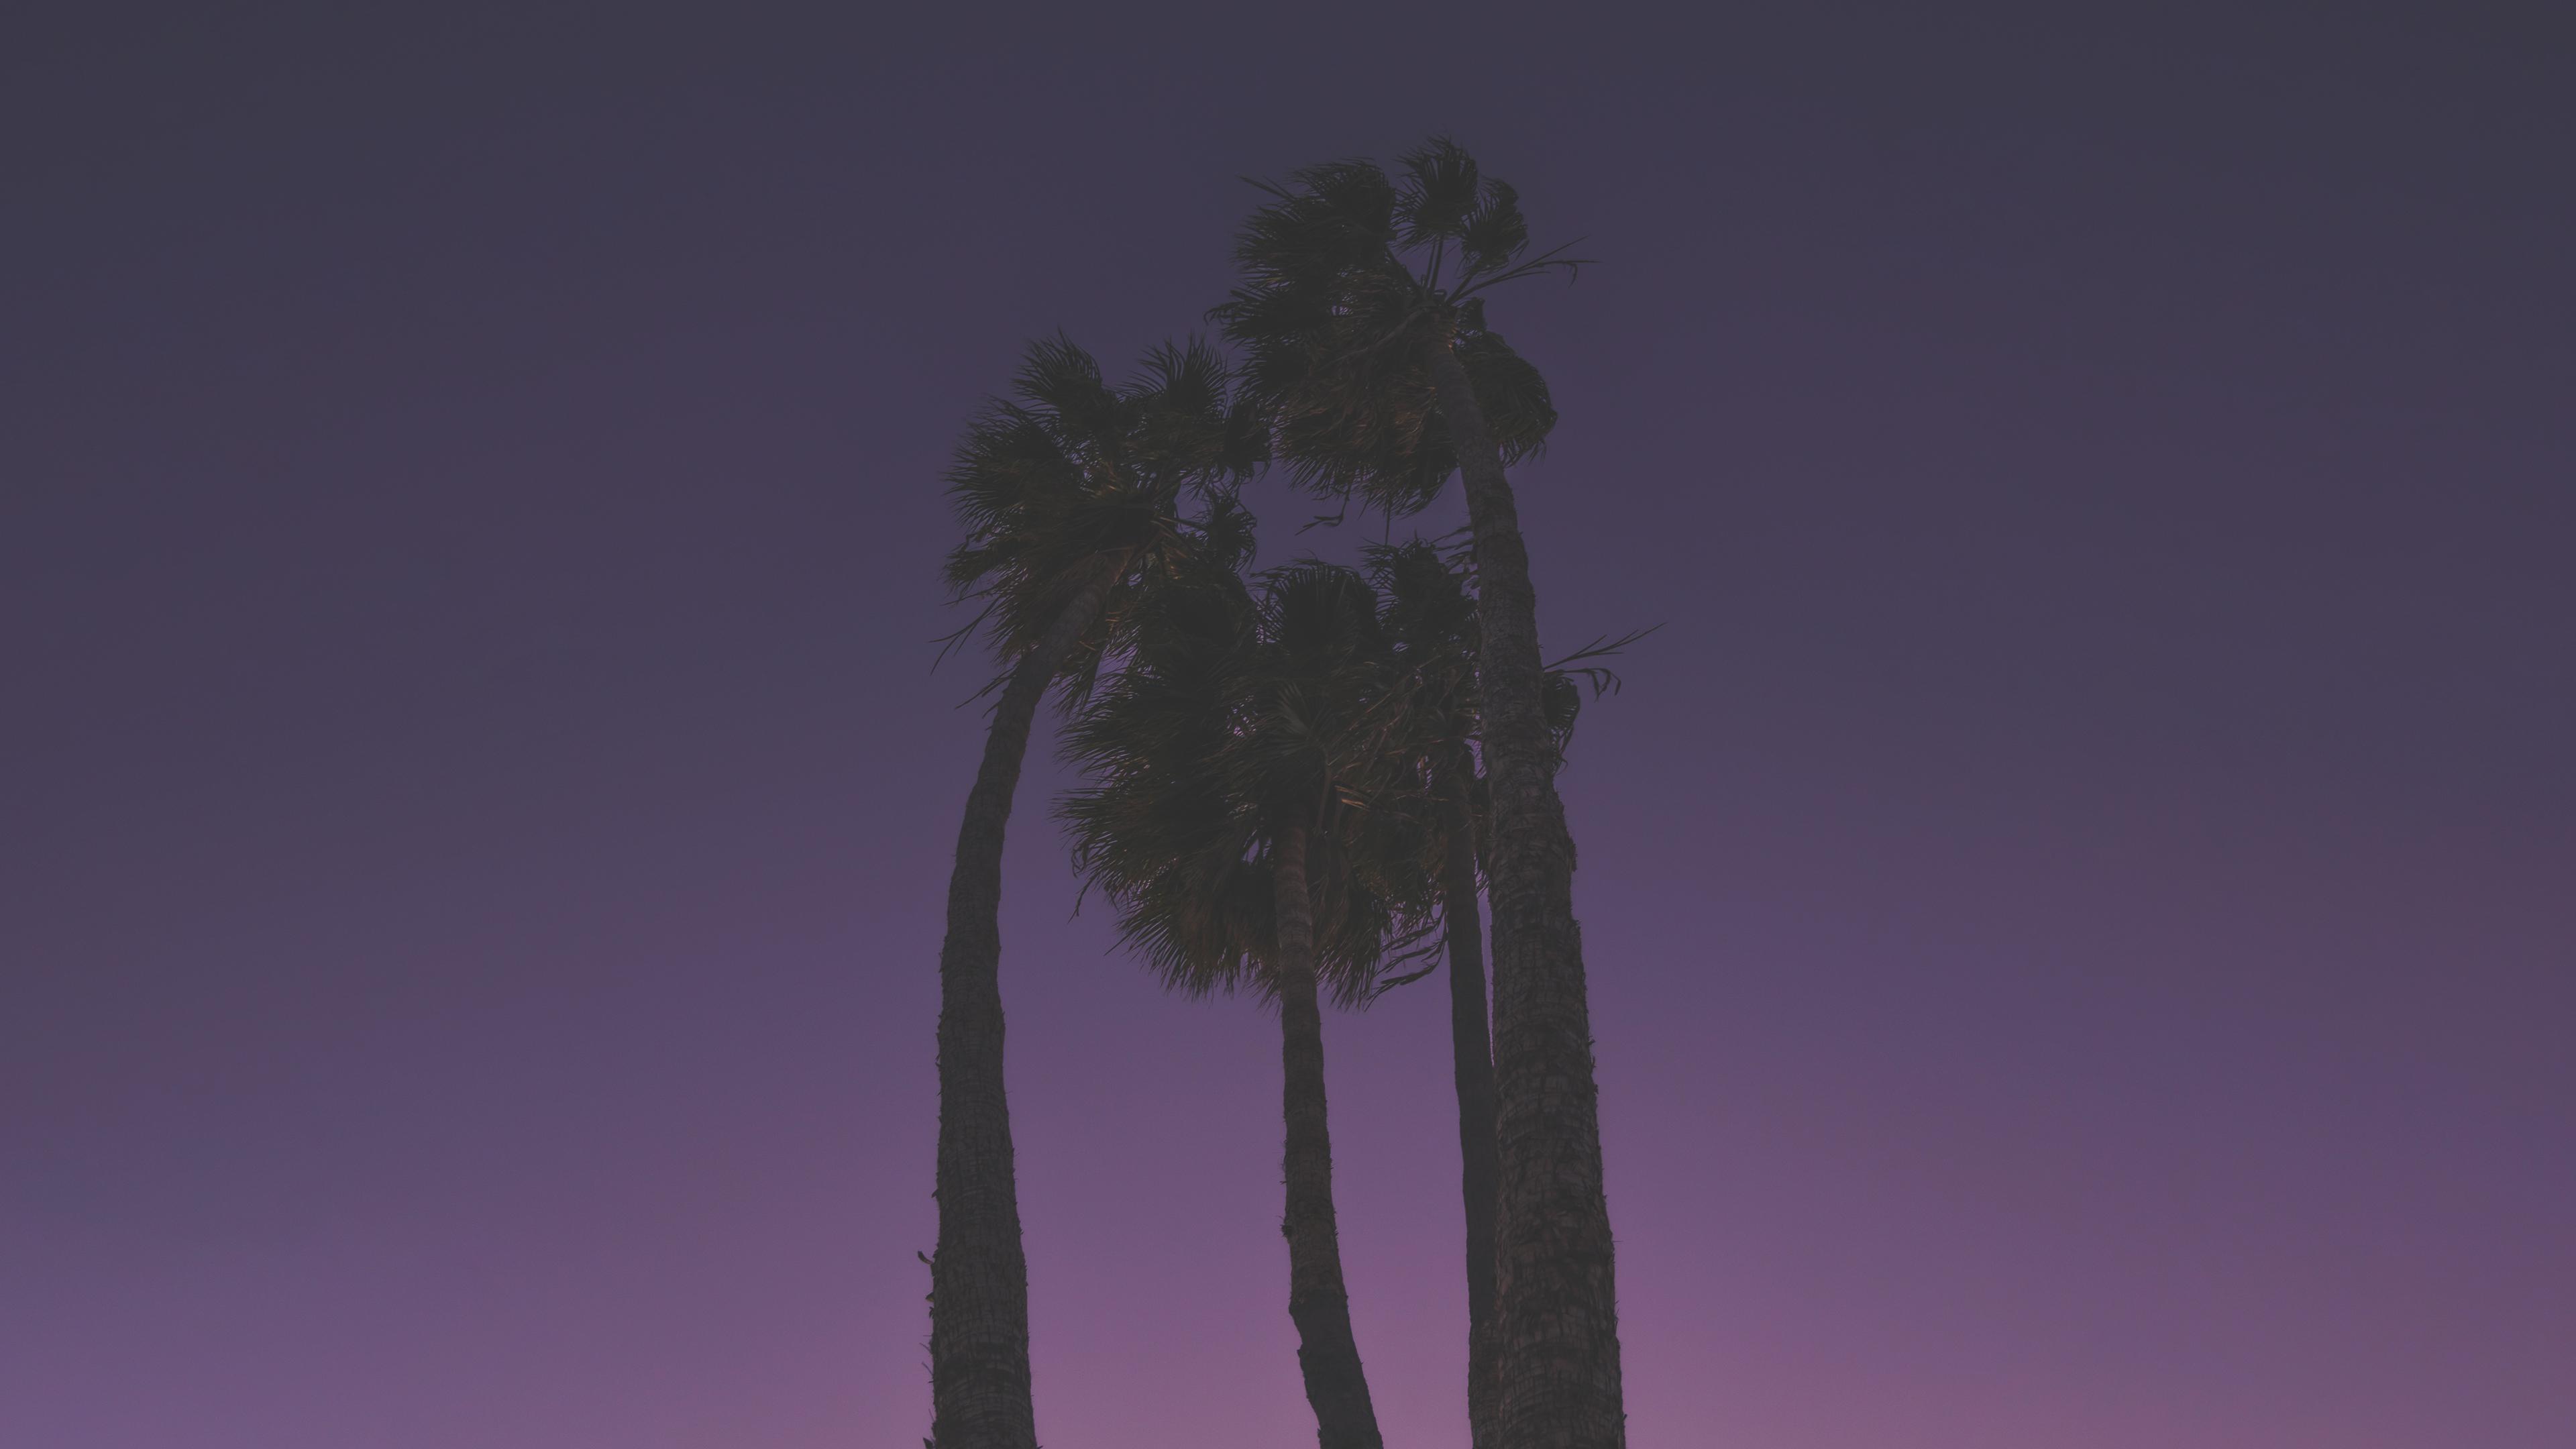 Palm 4K wallpaper for your desktop or mobile screen free and easy to download